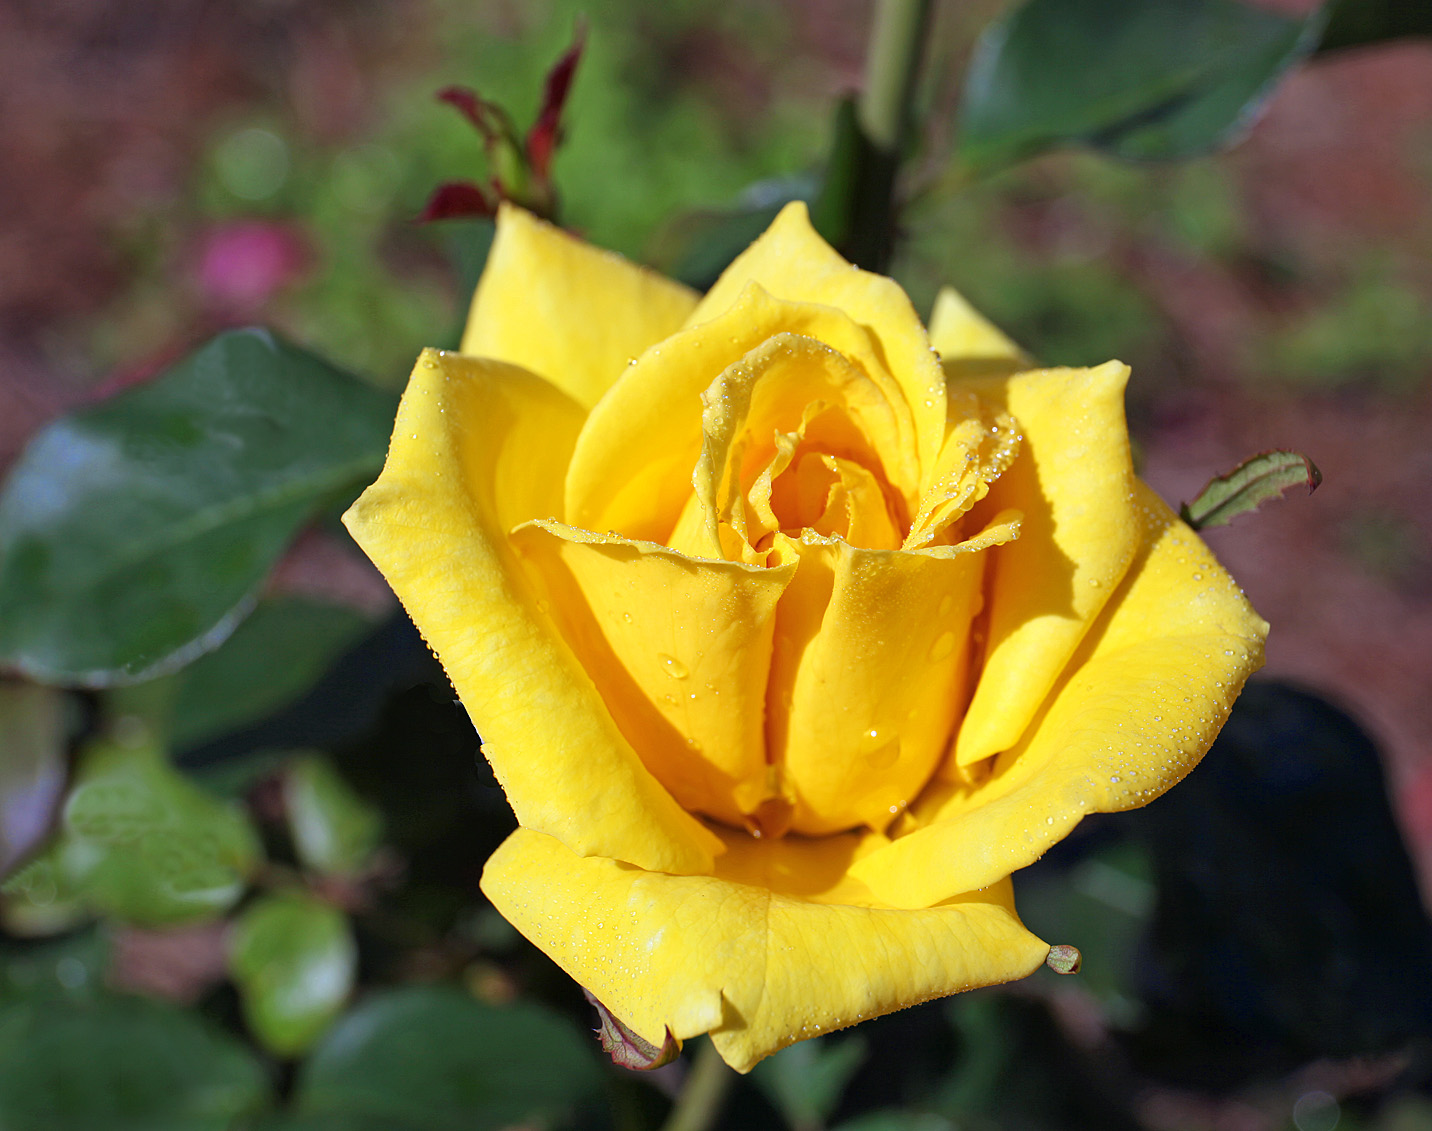 Southern Lagniappe: In the Rose Garden